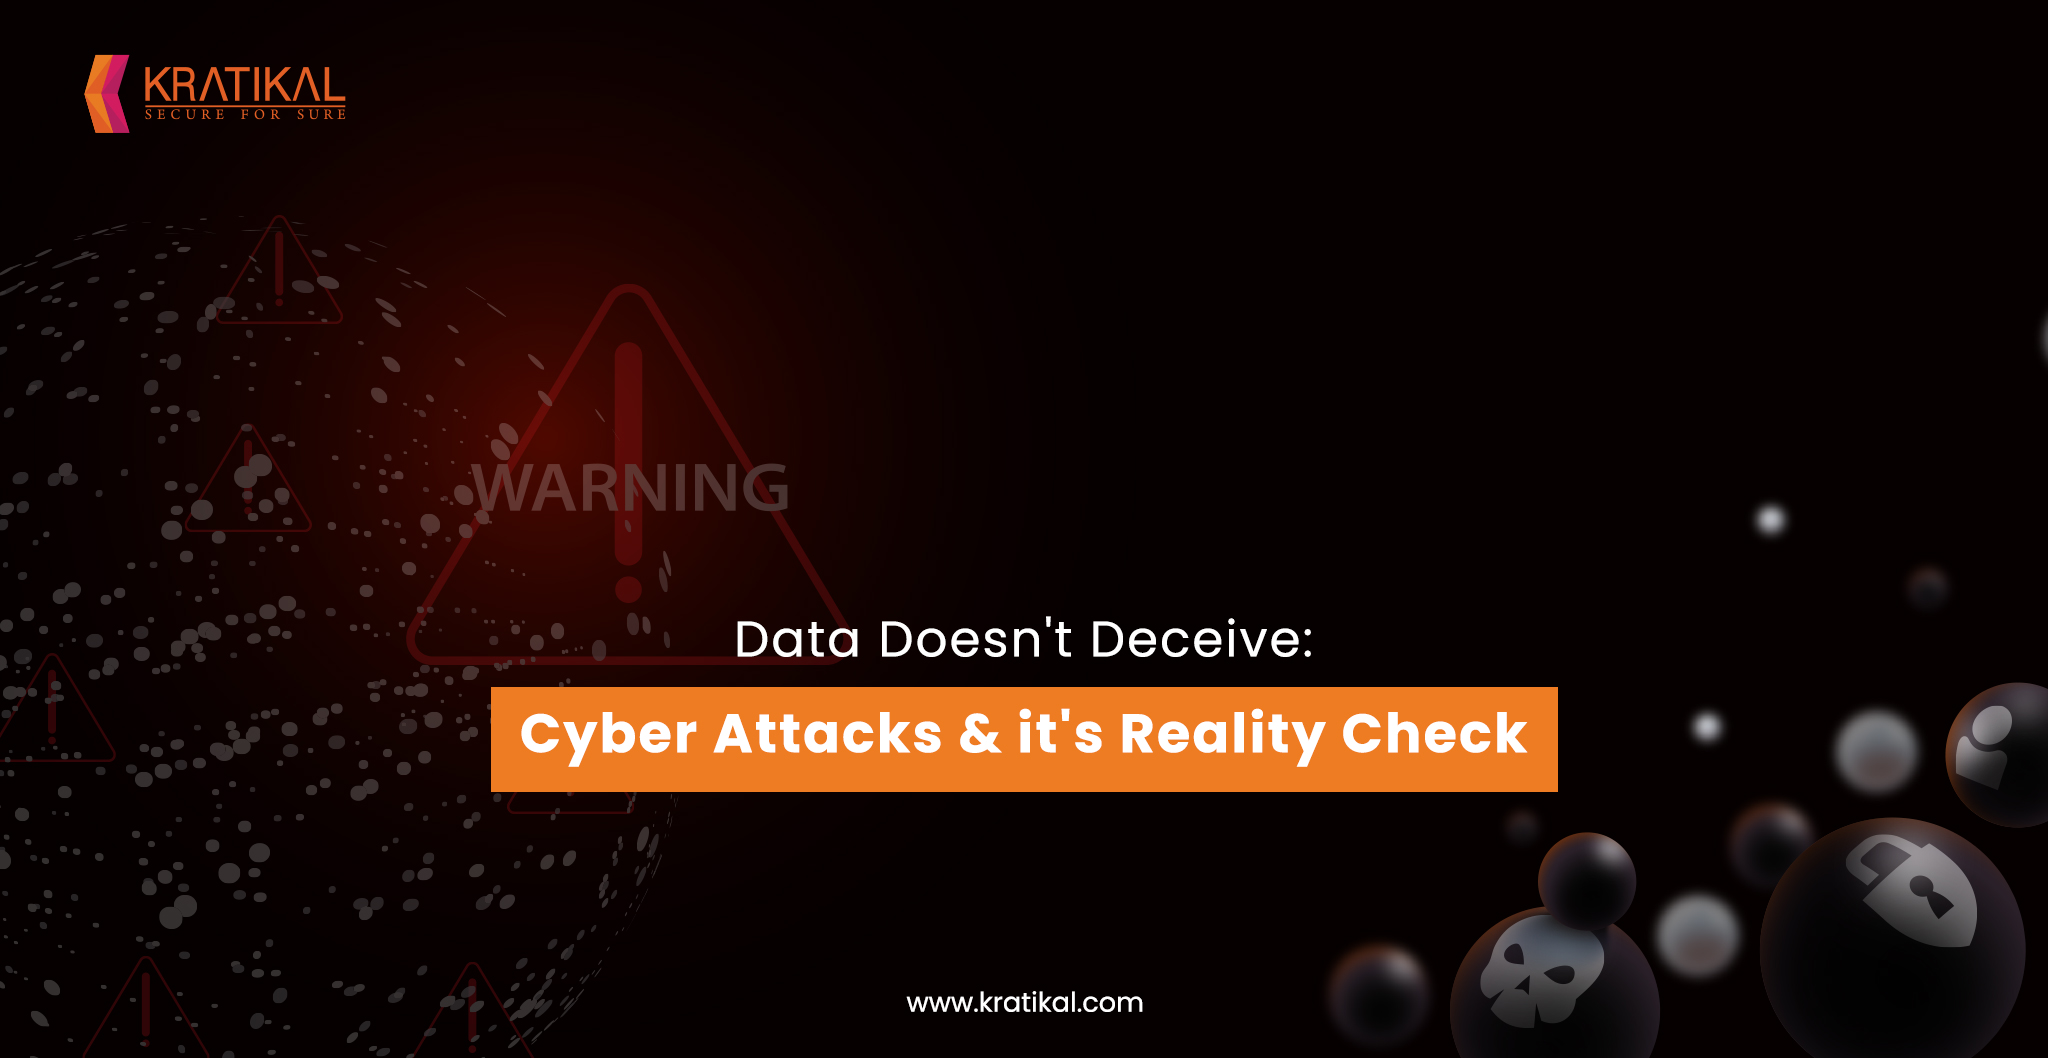 Data Doesn't Deceive: Cyber Attacks & it's Reality Check